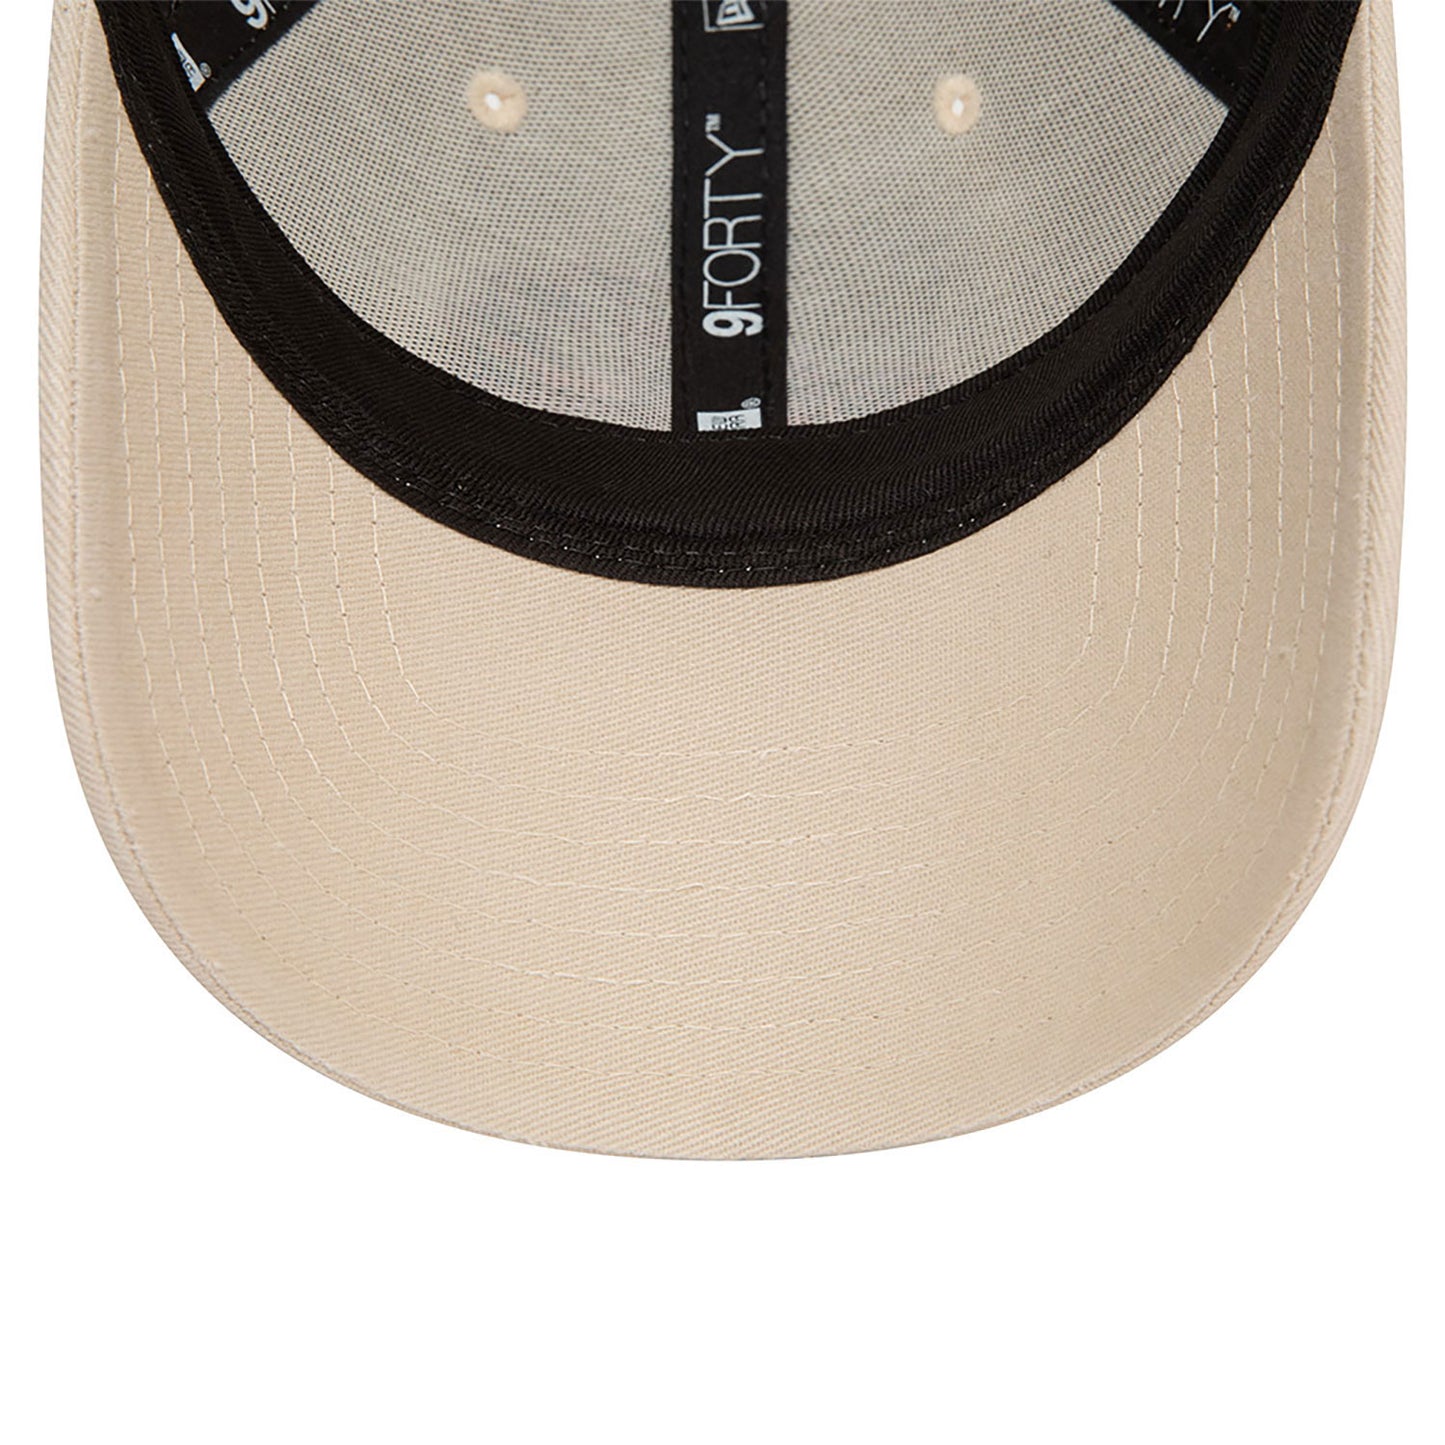 NEW ERA Cocktail Crab Character Light Beige 9FORTY Adjustable Cap